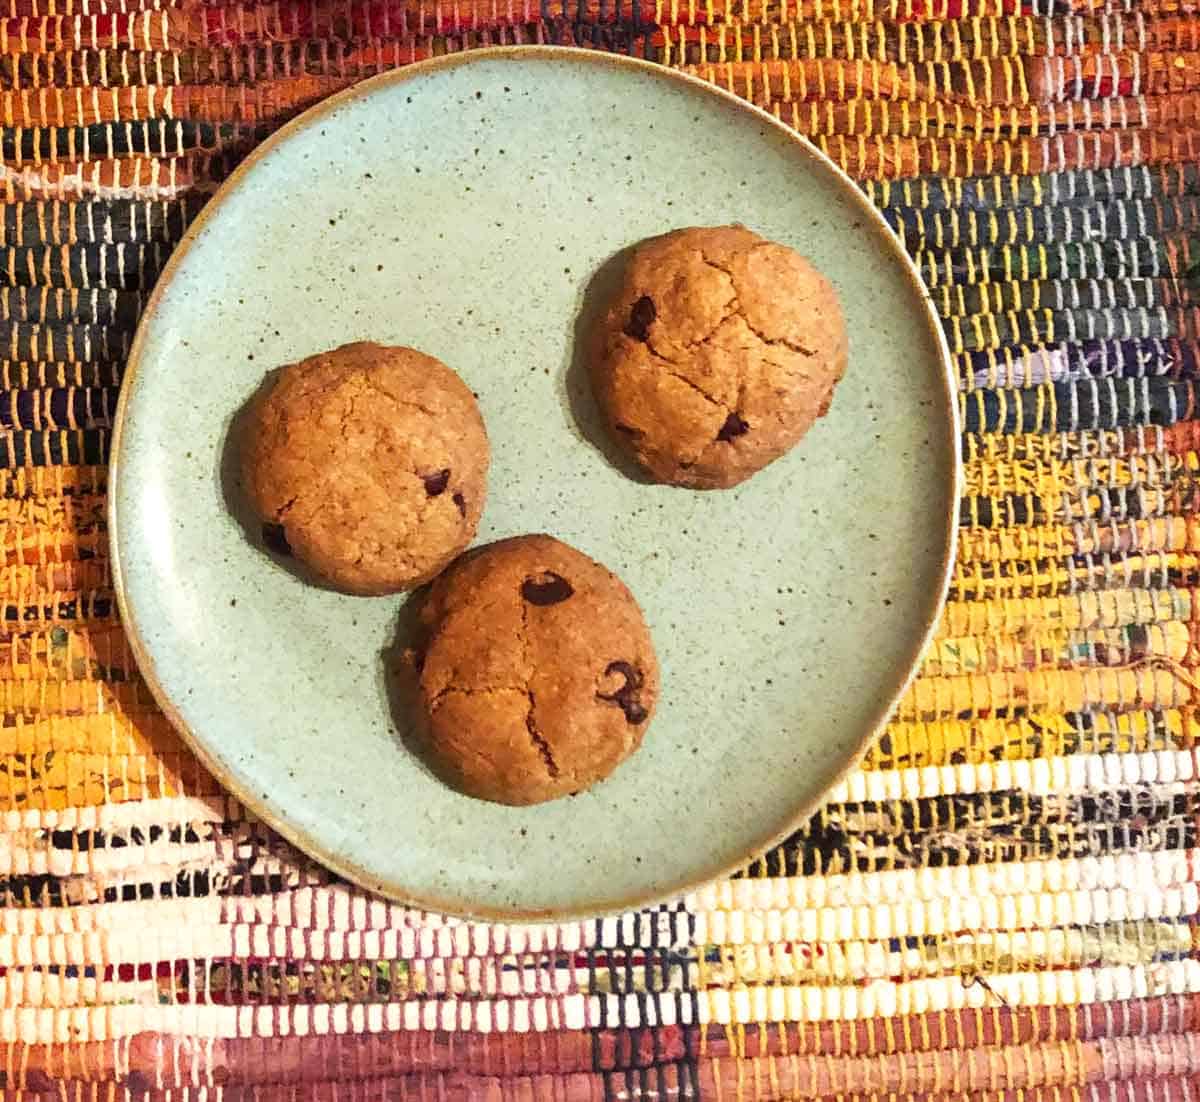 Three chocolate chip cookies are on a blue plate on top of a colorful plaid placemat.